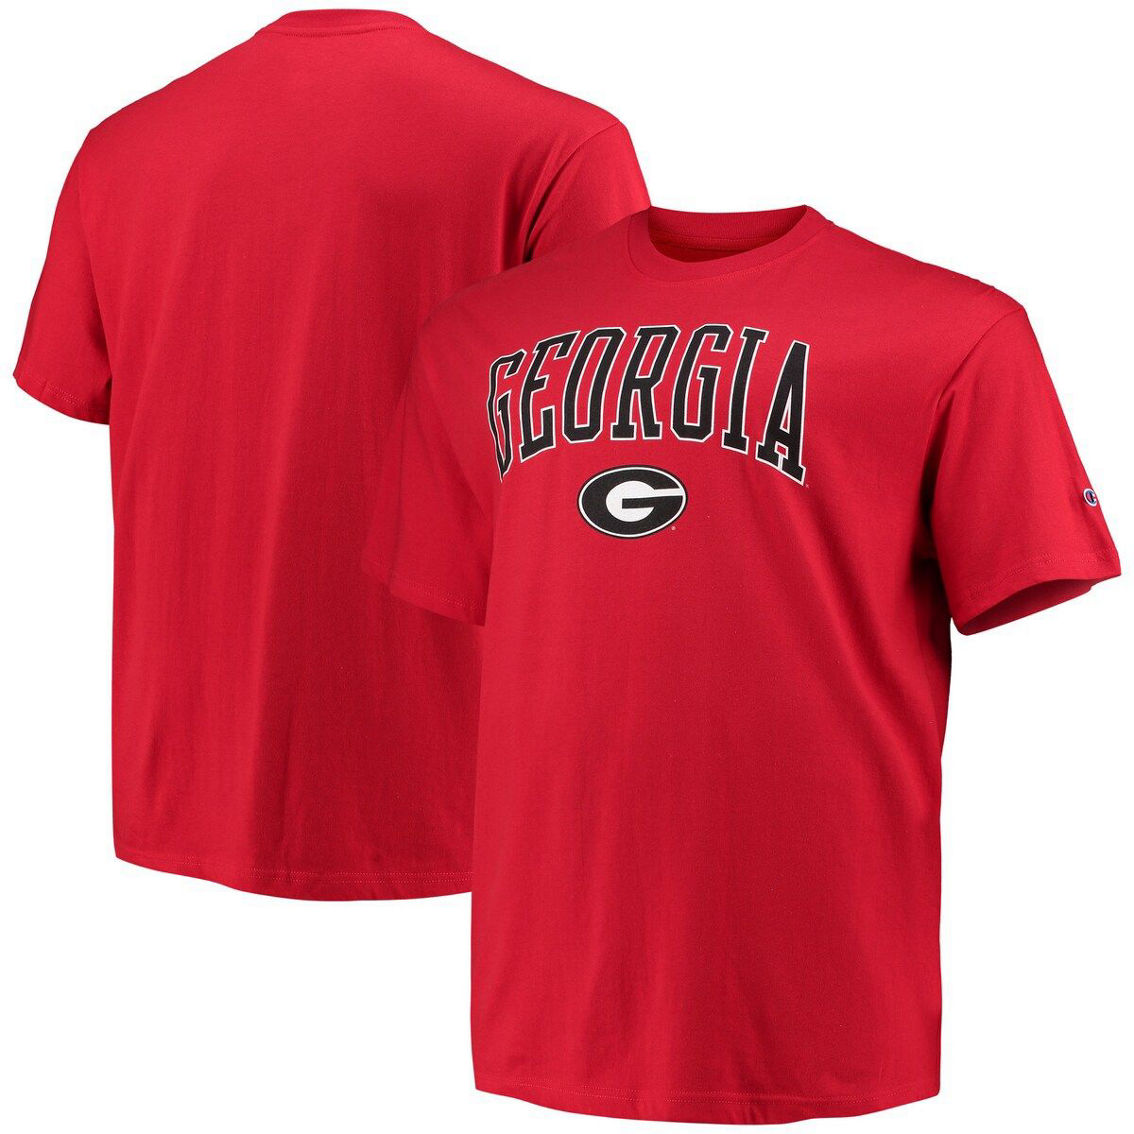 Champion Men's Red Georgia Bulldogs Big & Tall Arch Over Wordmark T-Shirt - Image 2 of 4